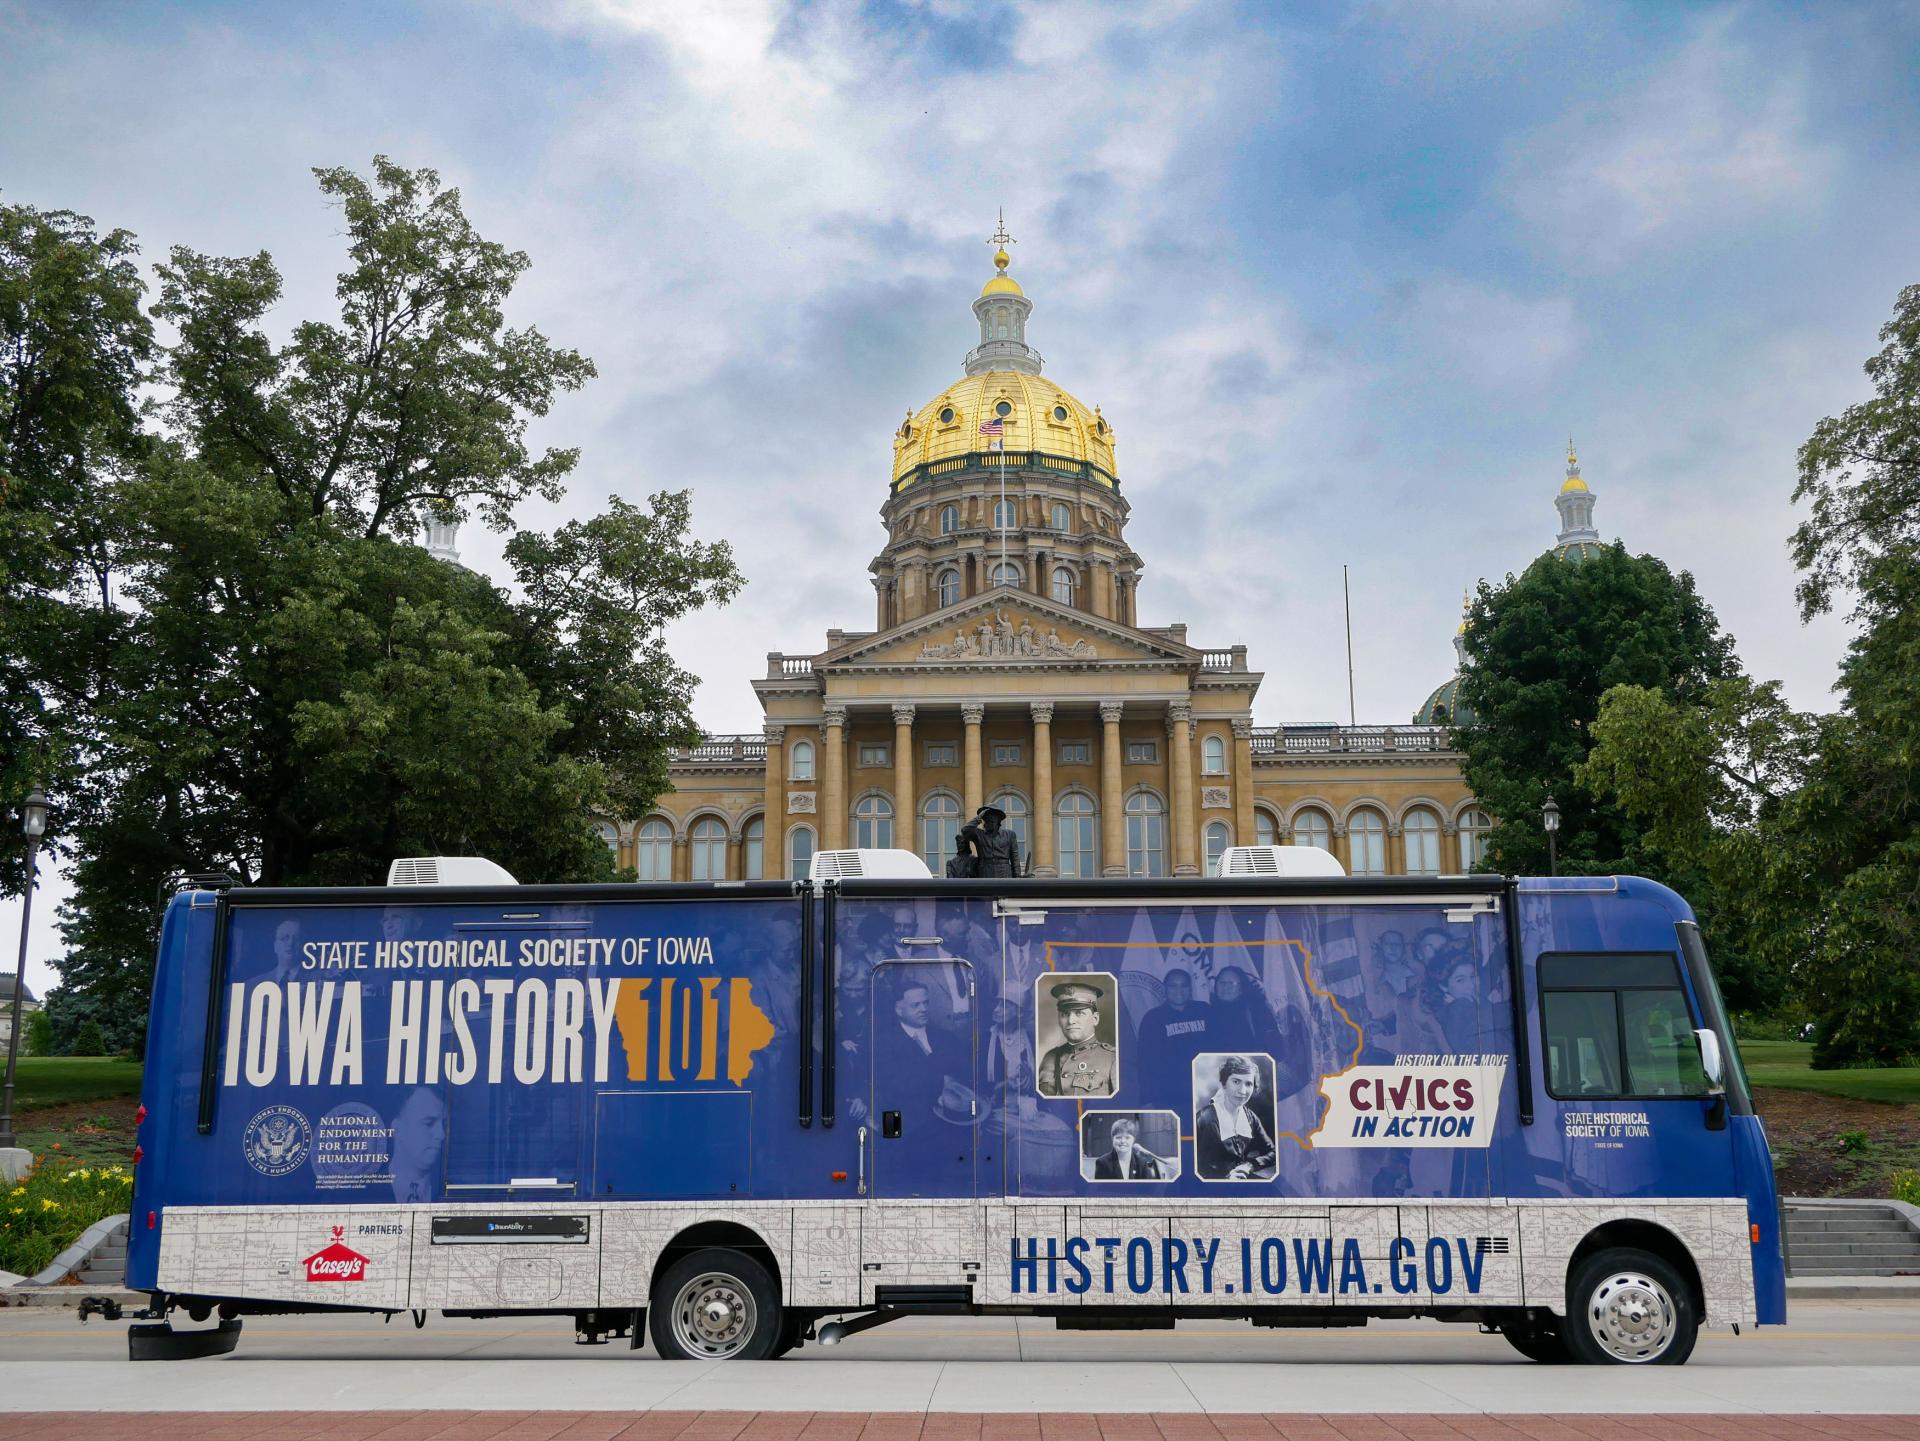 The Mobile Museum 3.0 is parked in front of a view of the Capitol Building in Des Moines